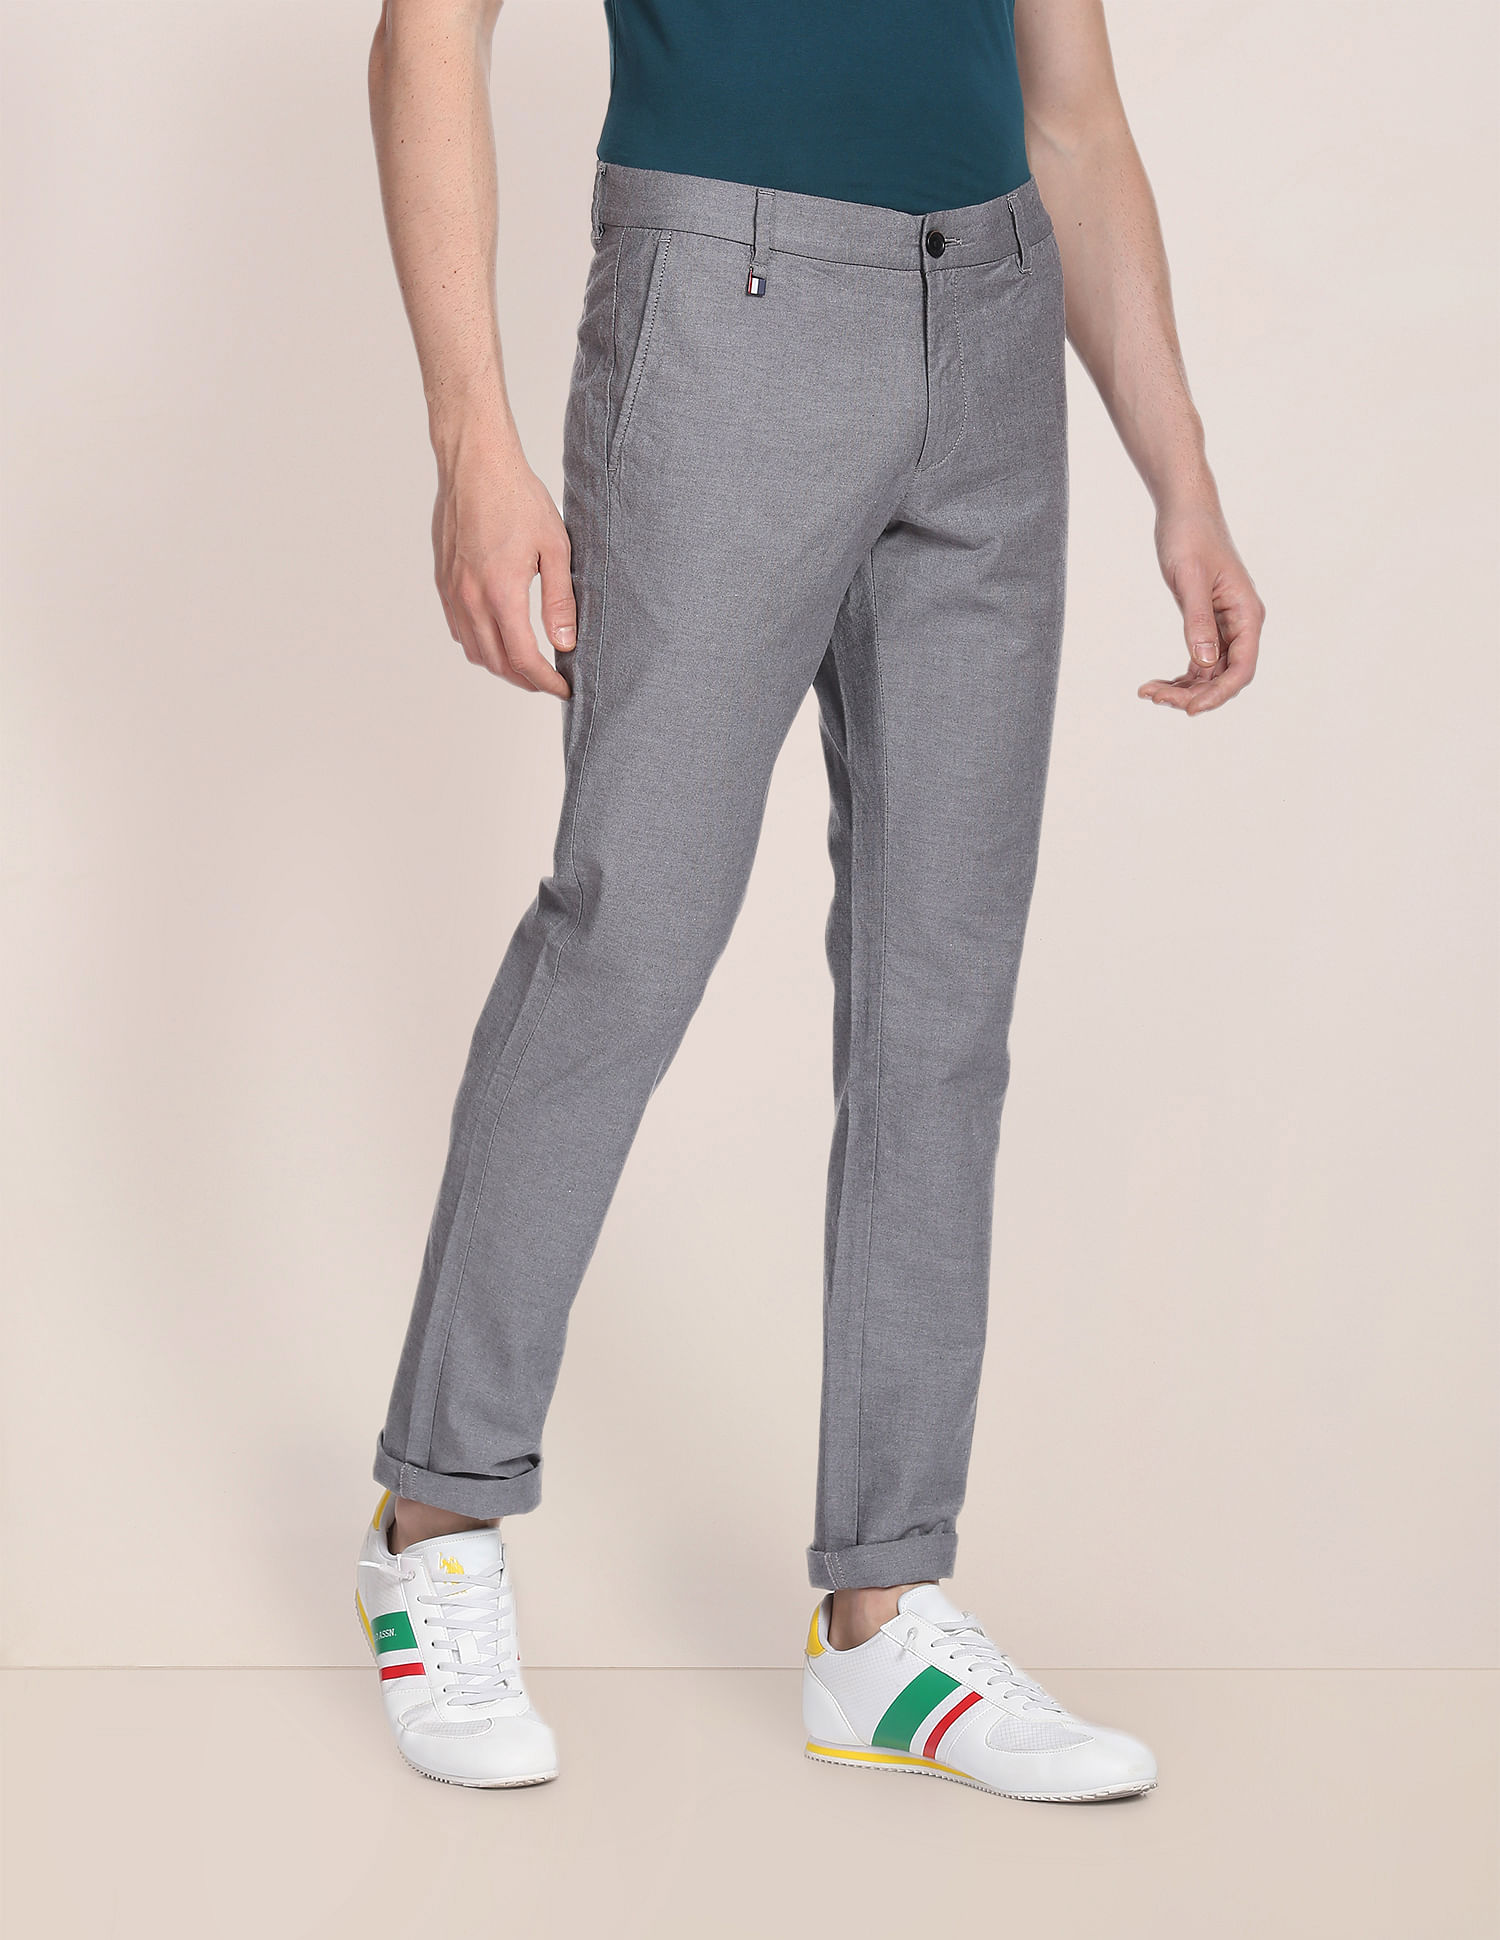 Buy U.S. Polo Assn. Solid Cotton Lycra Trousers - NNNOW.com